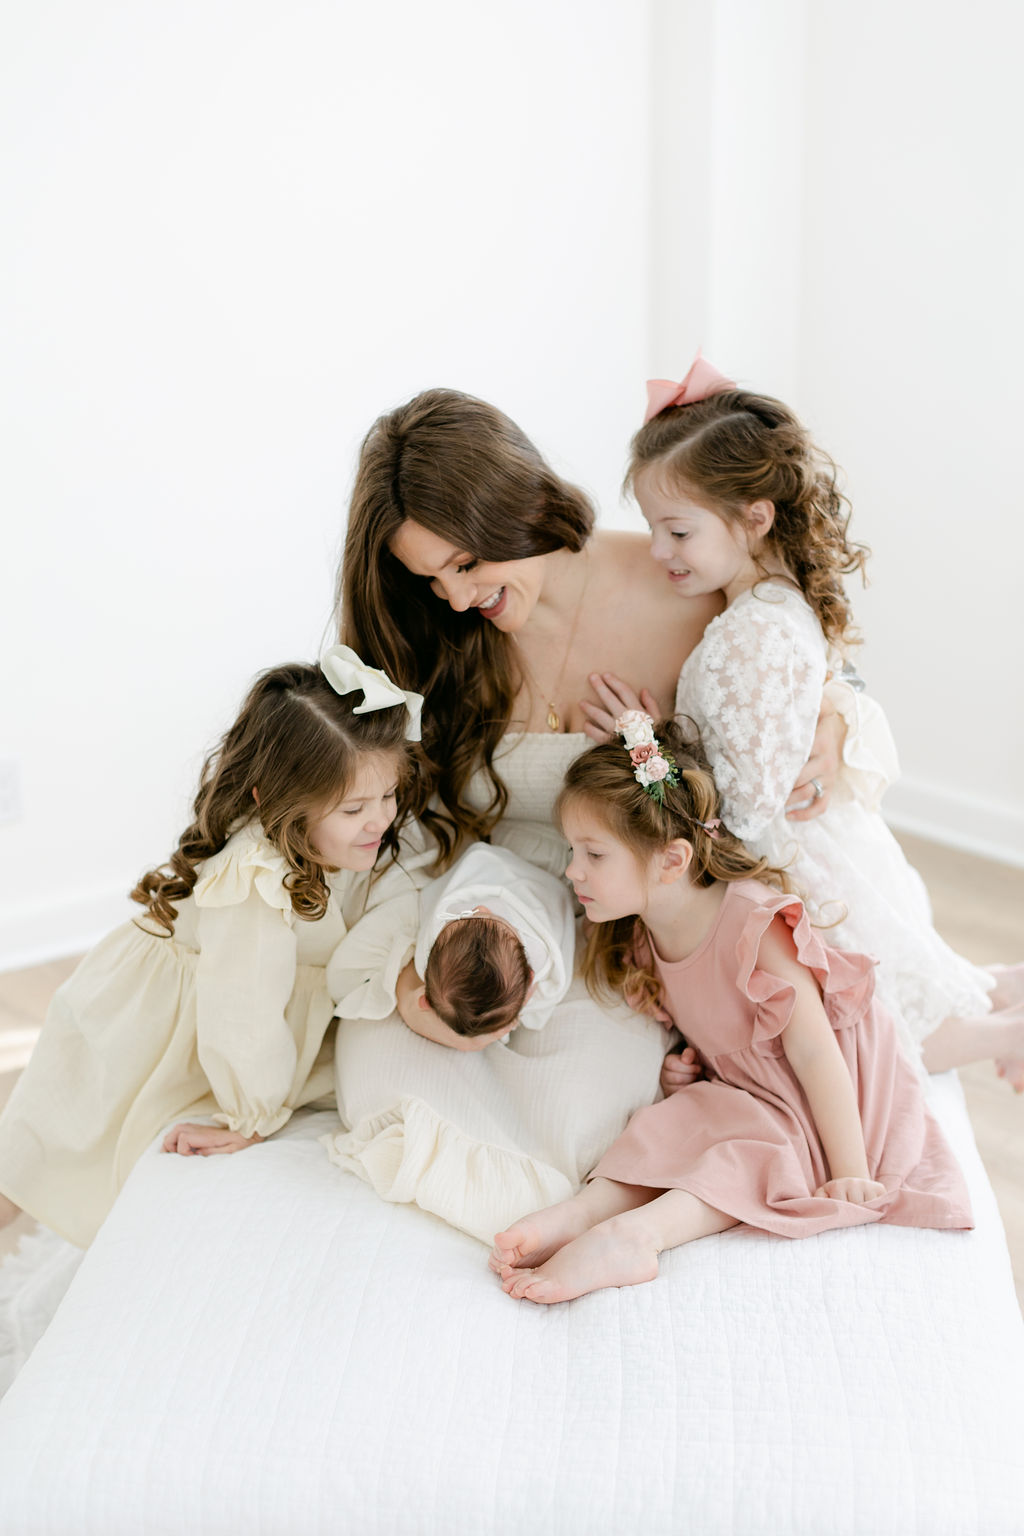 A happy mother shows her three toddler daughters their sleeping newborn baby sister on a bed in a studio